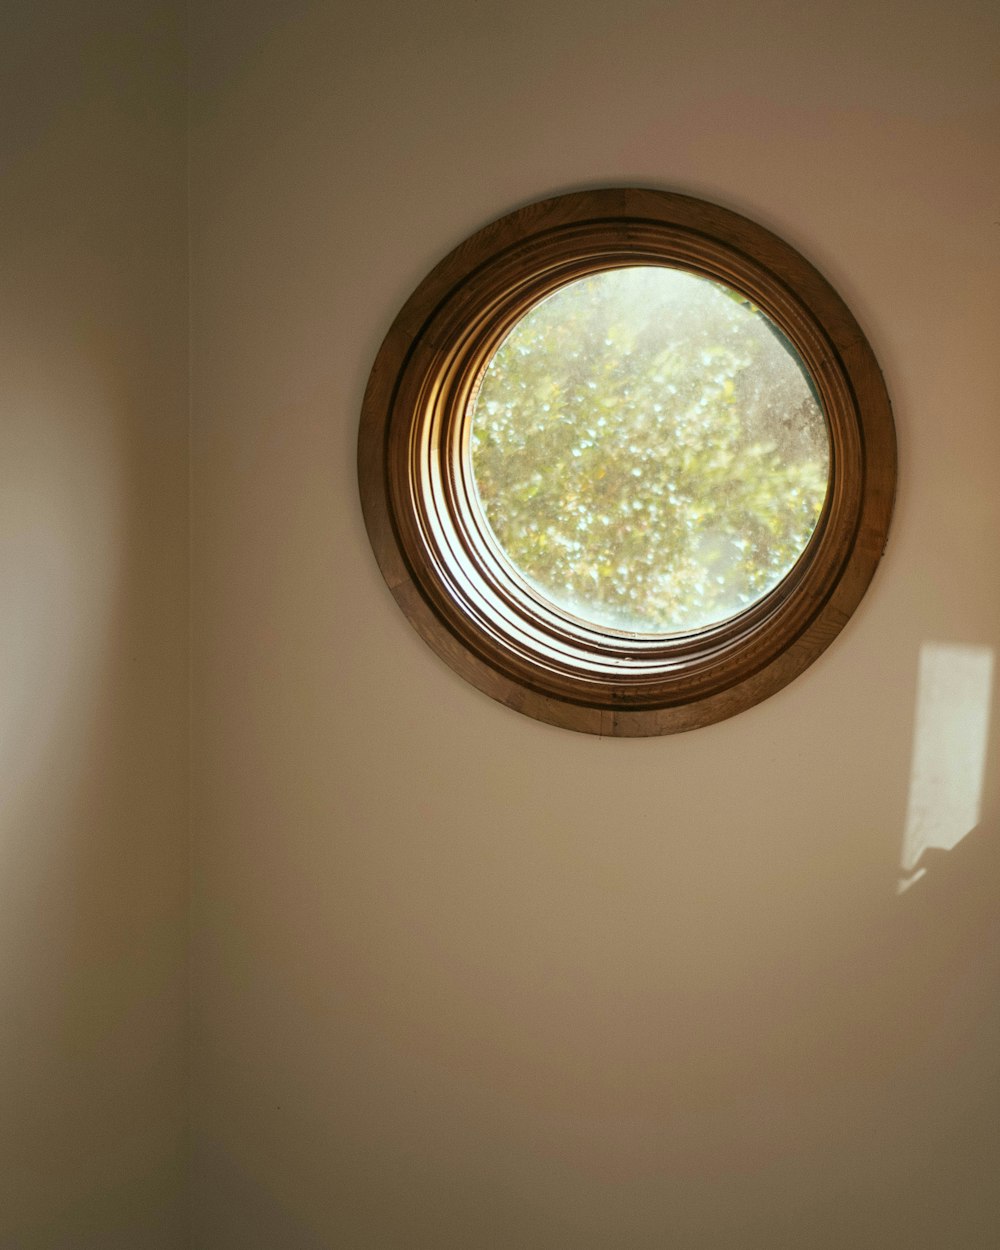 a round window in the corner of a room